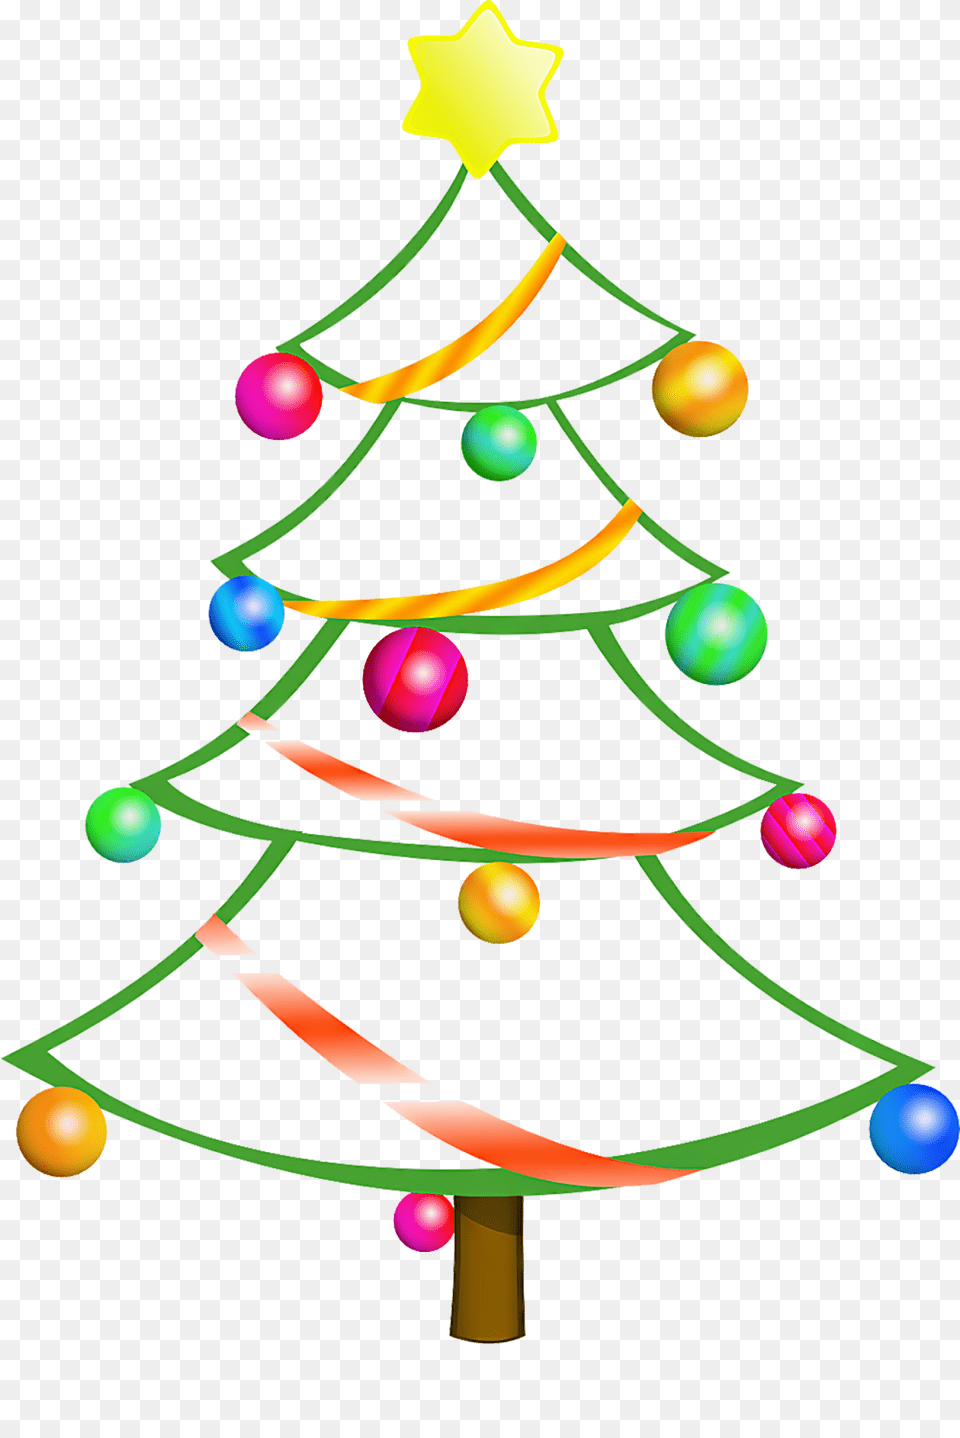 Merry Christmas Border Images, Christmas Decorations, Festival, Chandelier, Lamp Free Transparent Png